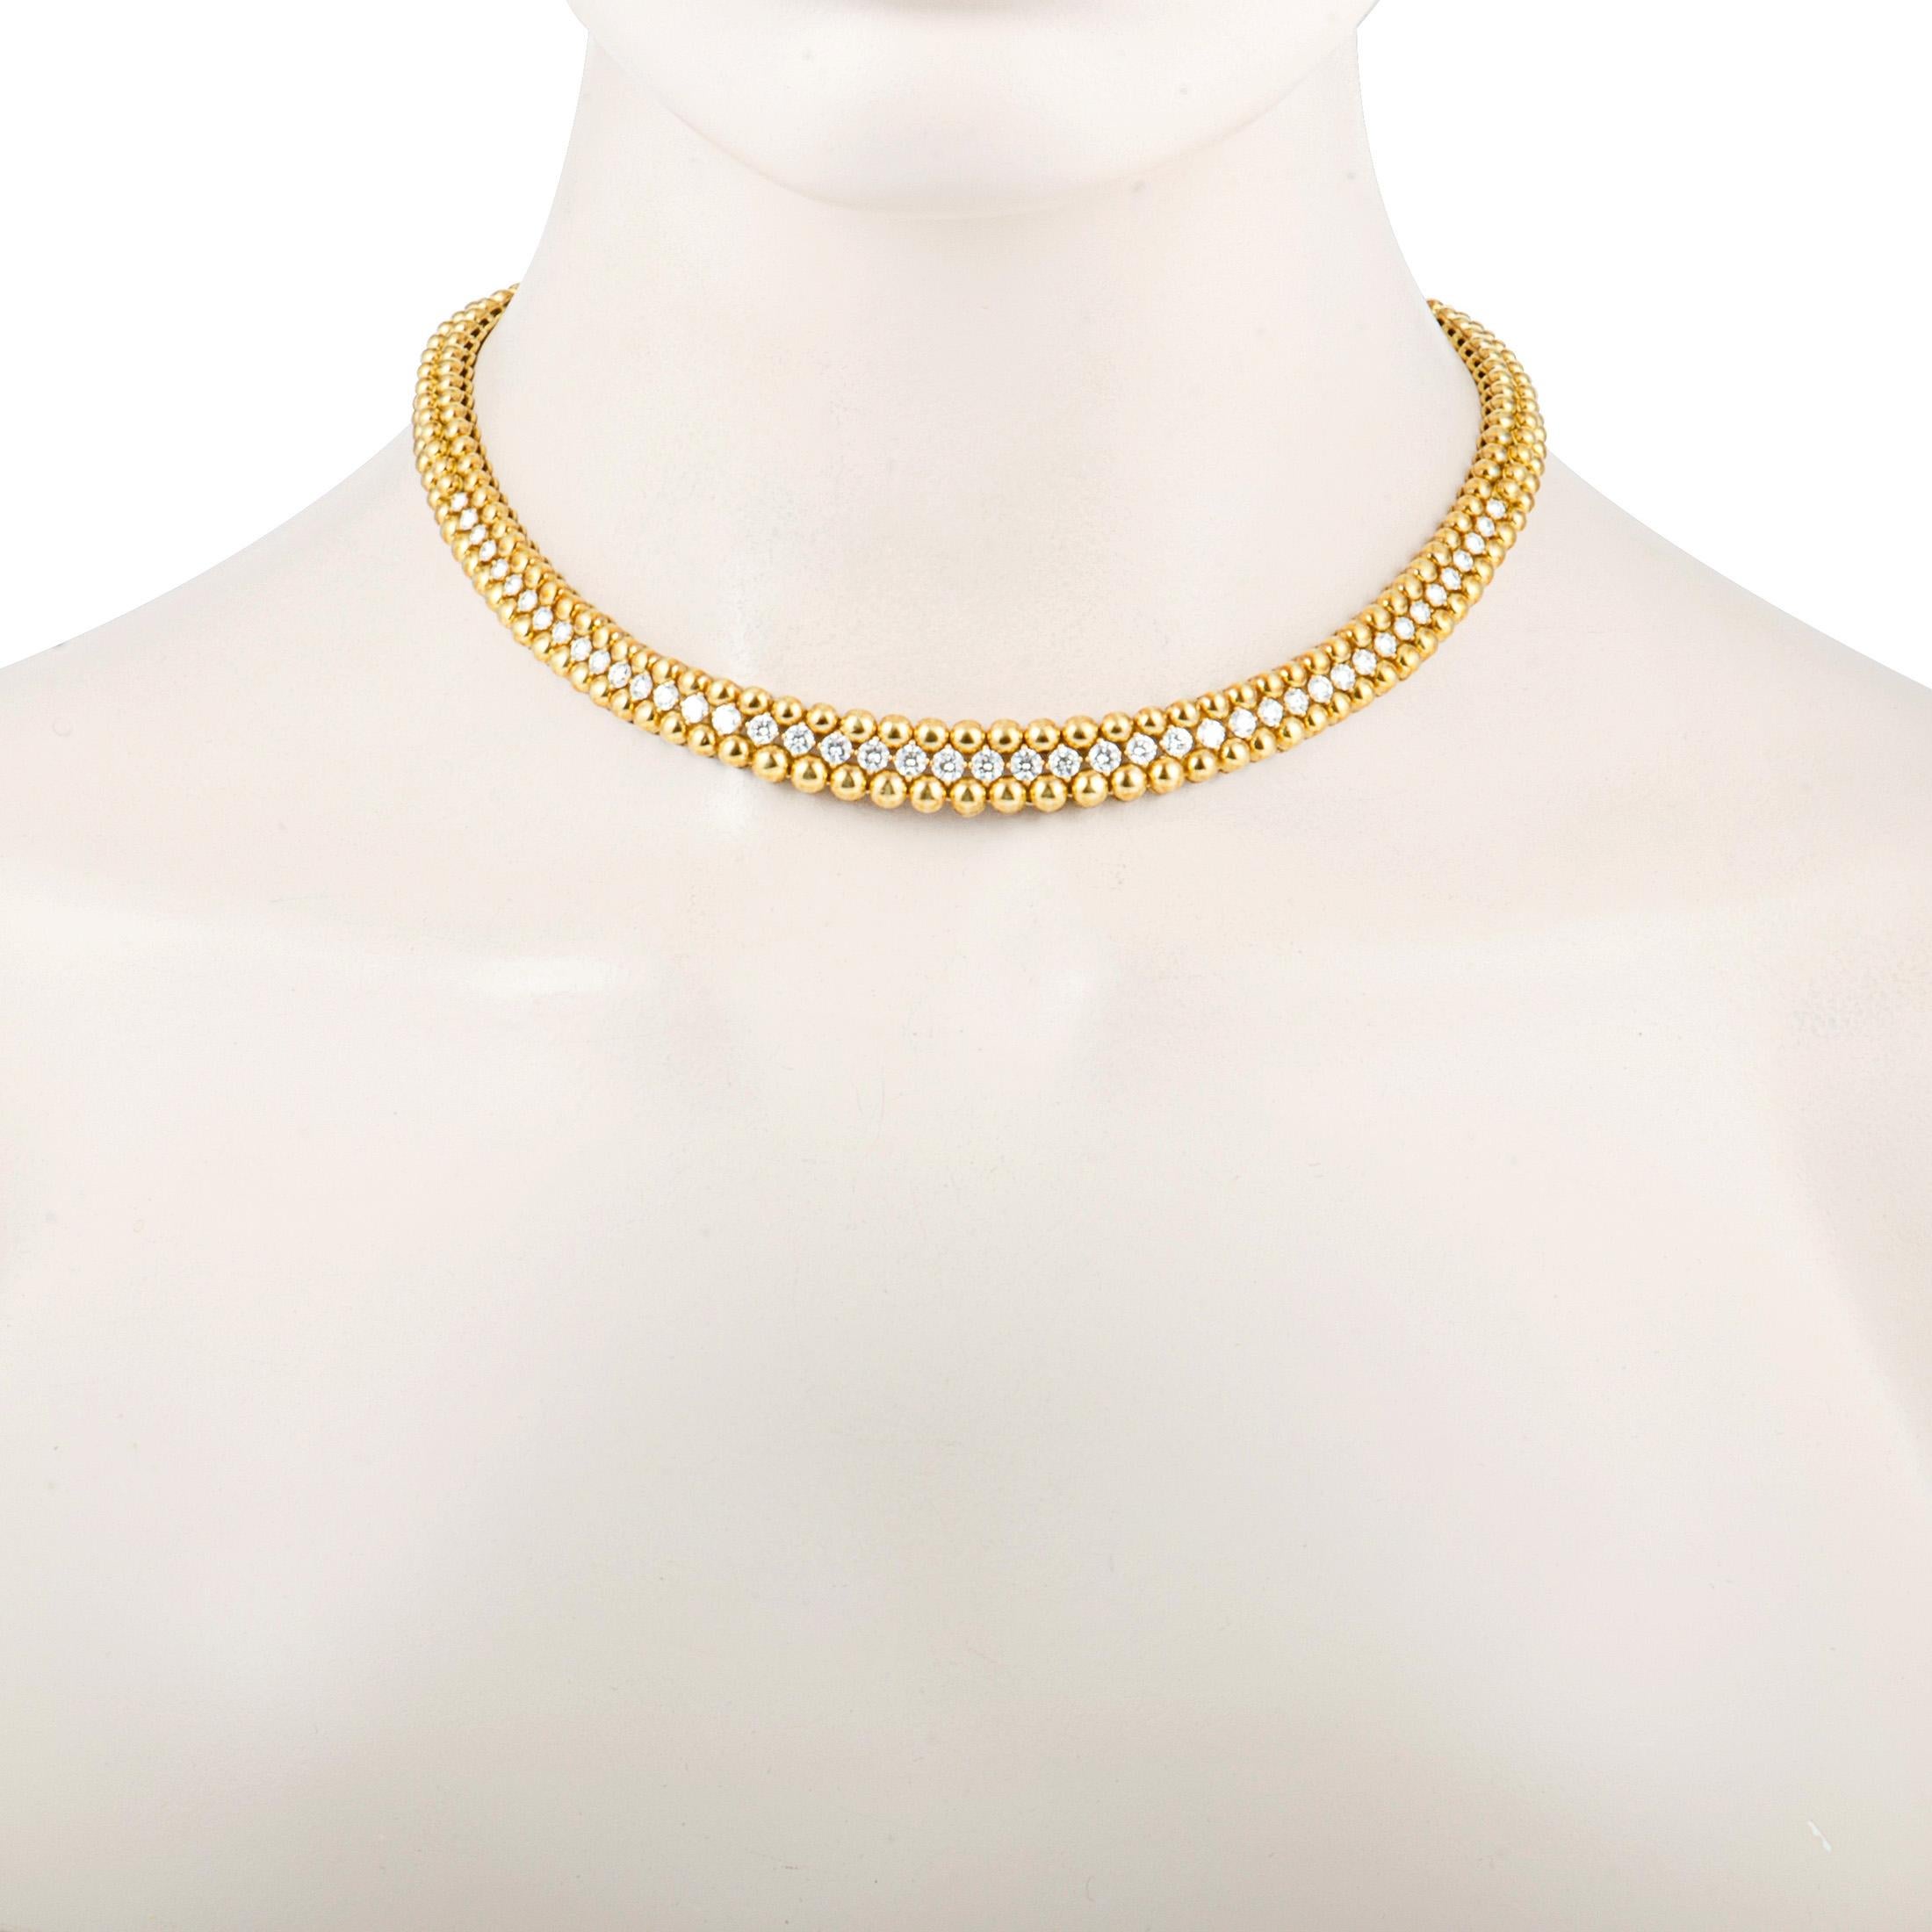 Gracefully adorn your evening look with this fashionably elegant necklace by Boucheron. The glamorous necklace is beautifully designed with simmering 18K yellow gold and embellished with 5.00ct of sparkling E-F color, VS1 clarity diamonds.
